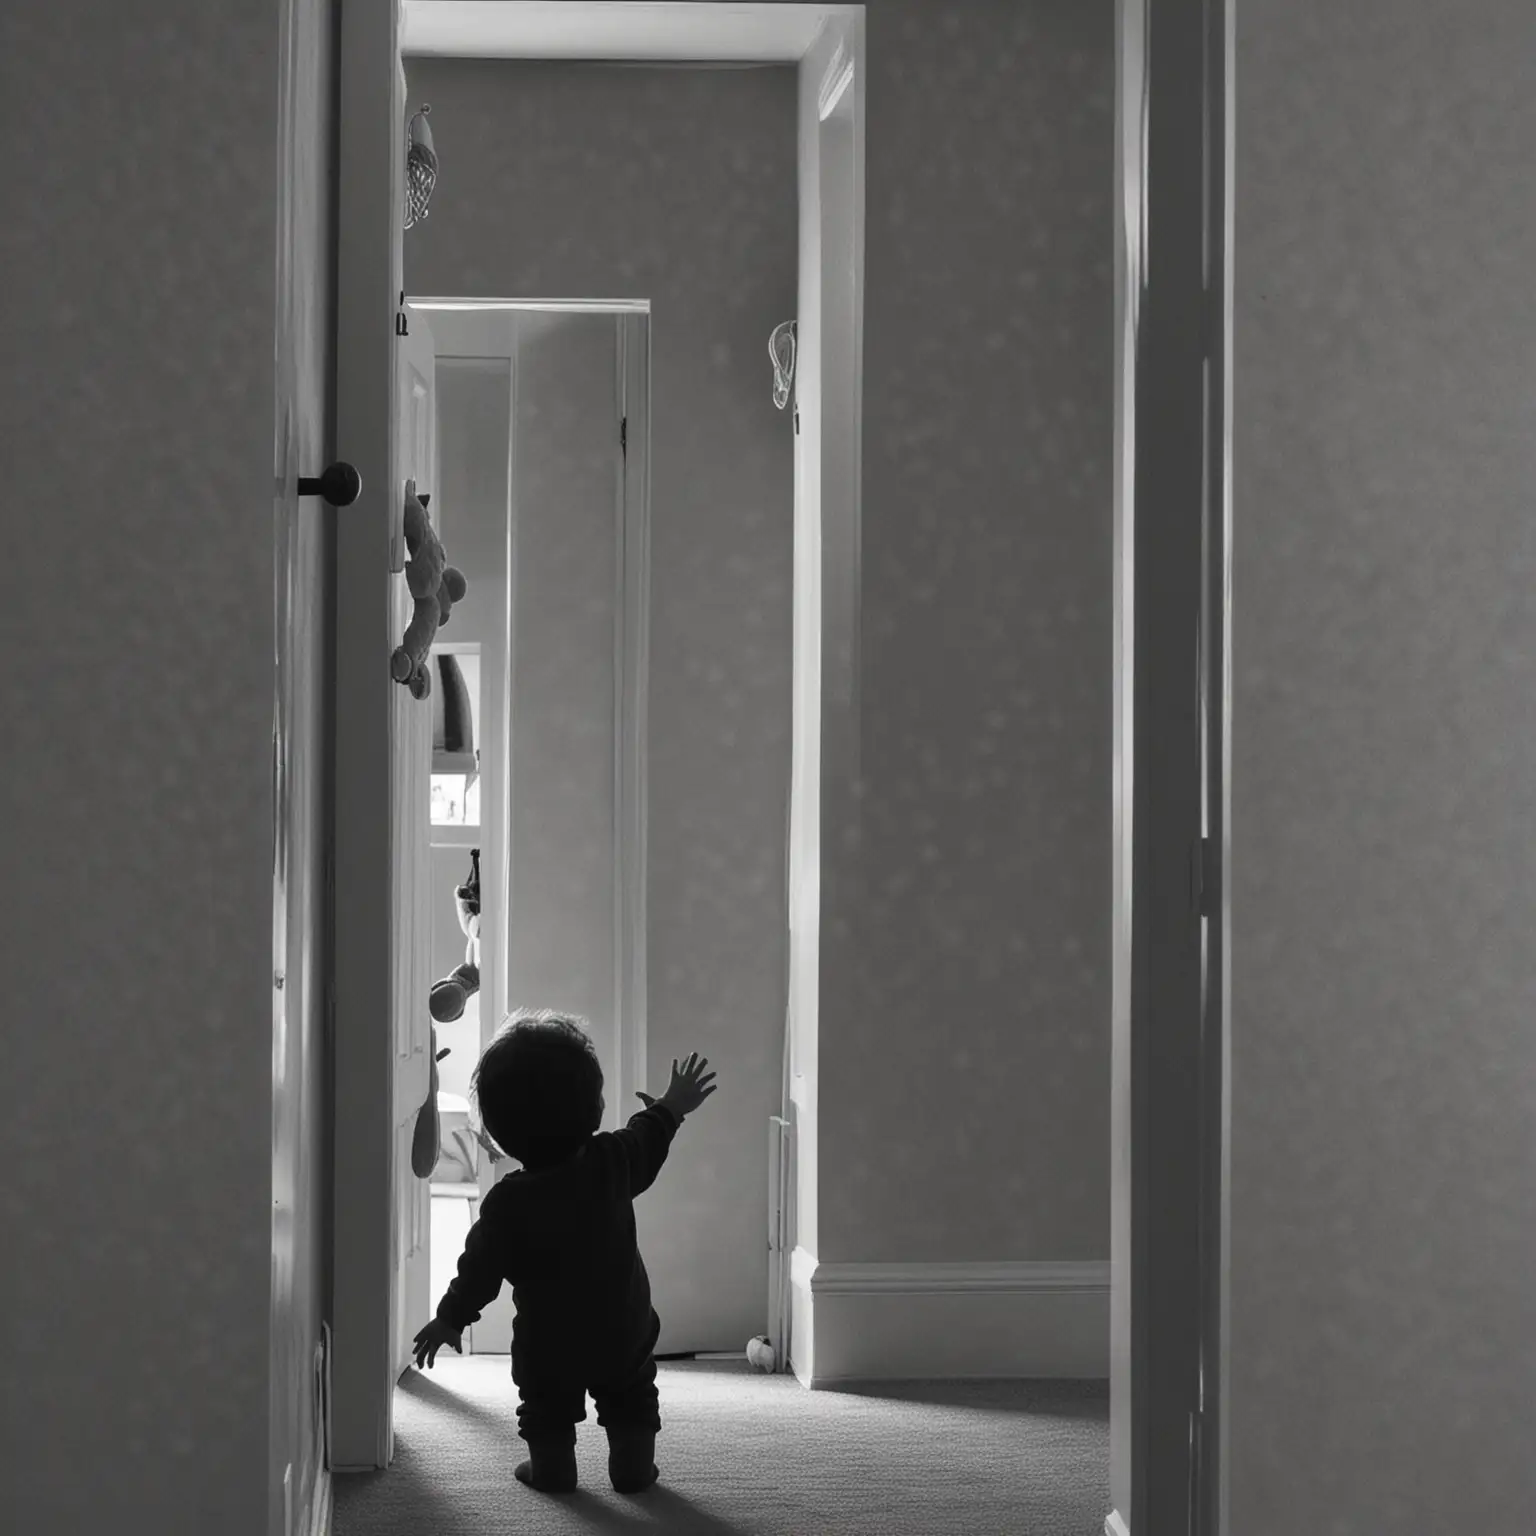 Silhouette of a Little Boy Holding a Teddy Bear at a Doorway